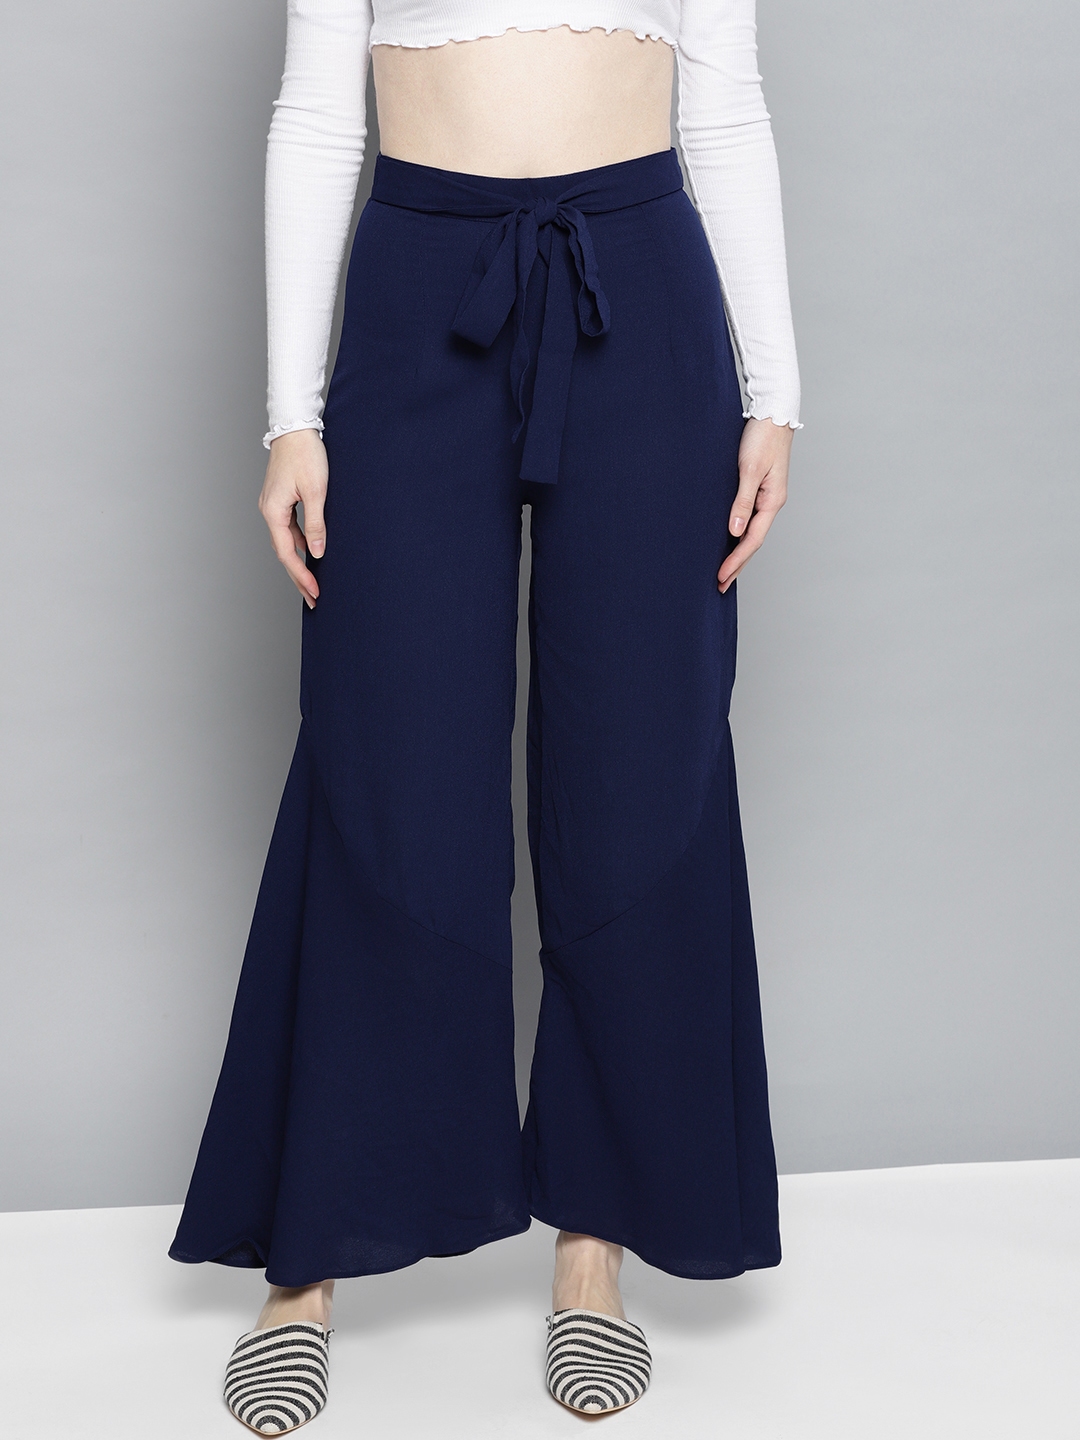 Miss Chase  Pants  Jumpsuits  Miss Chase Women Navy Blue Regular Fit  Solid Bootcut Trousers Sizemedium  Poshmark